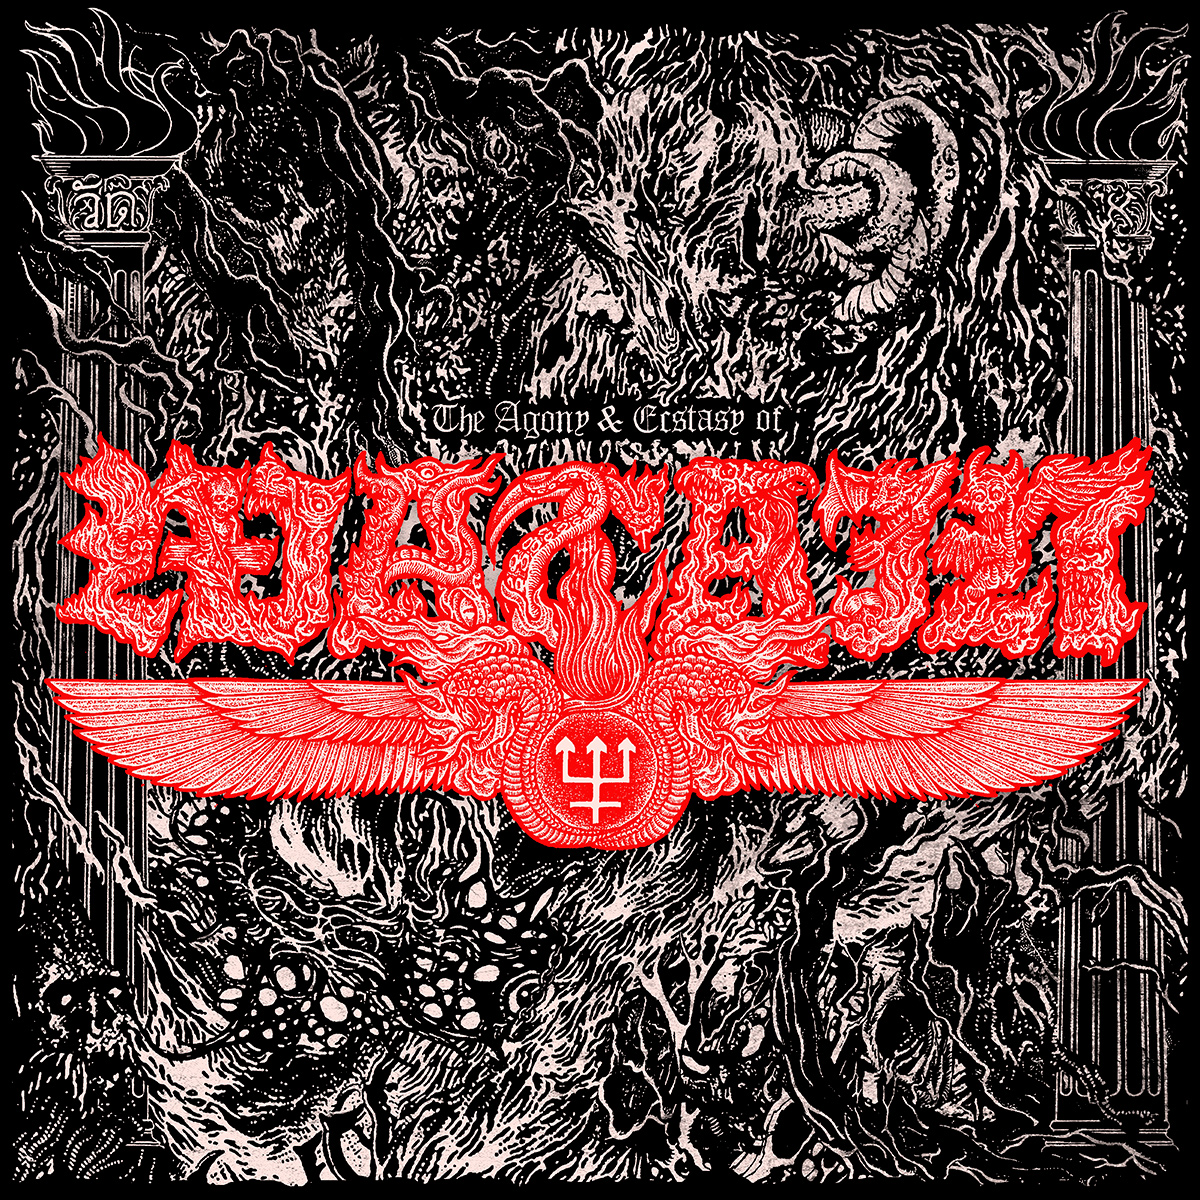 Watain - The Agony and Ecstasy of Watain